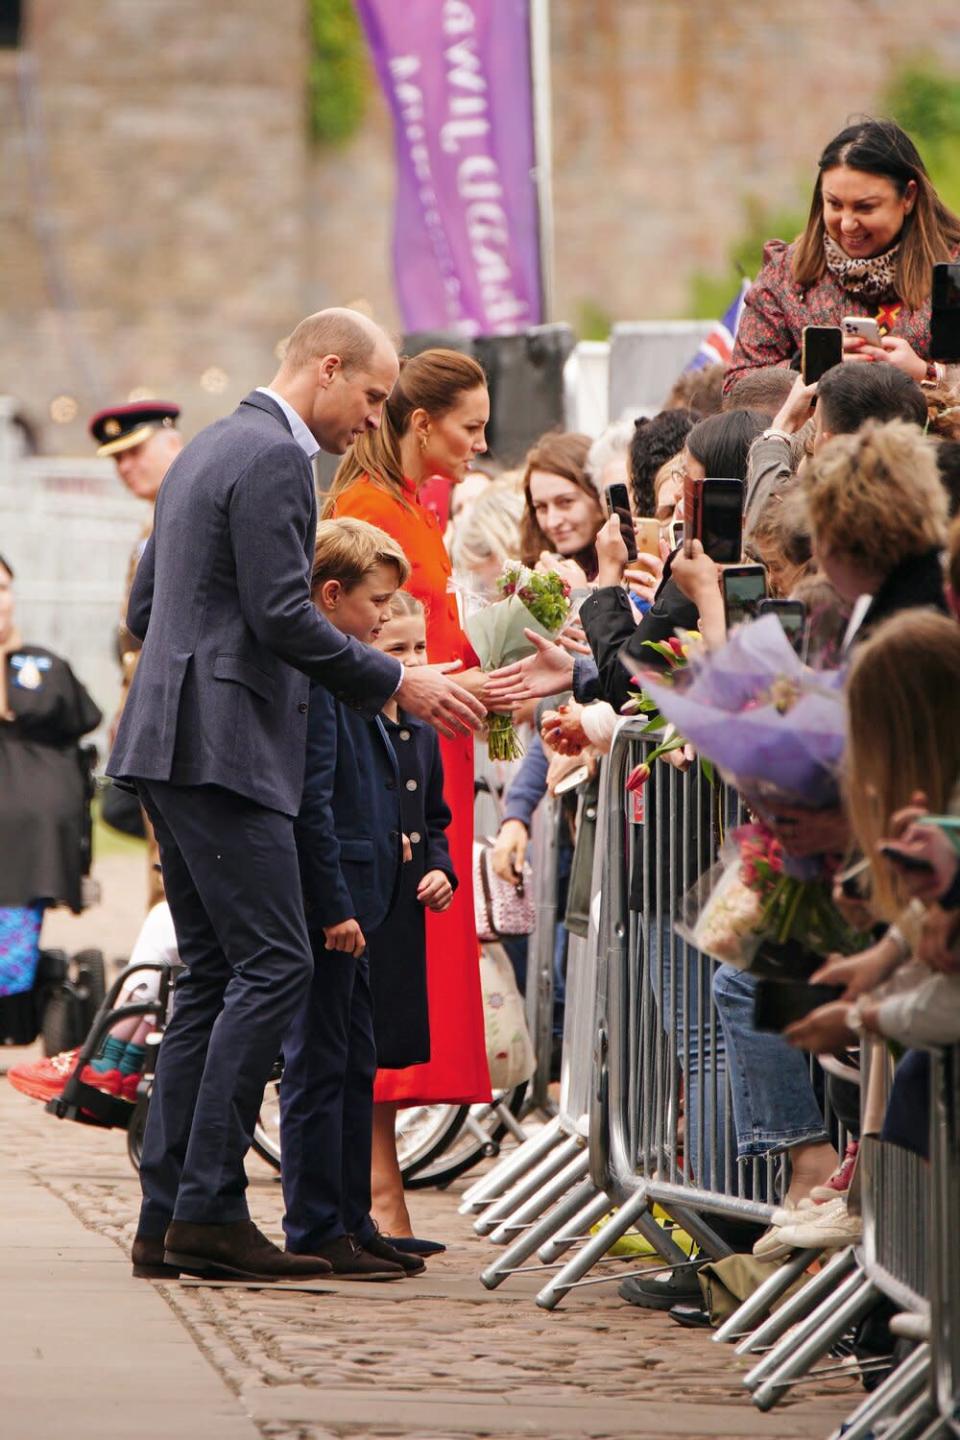 The Duke and Duchess of Cambridge, Prince George and Princess Charlotte during their visit to Cardiff Castle to meet performers and crew involved in the special Platinum Jubilee Celebration Concert taking place in the castle grounds later in the afternoon, as members of the Royal Family visit the nations of the UK to celebrate Queen Elizabeth II's Platinum Jubilee. Picture date: Saturday June 4, 2022.